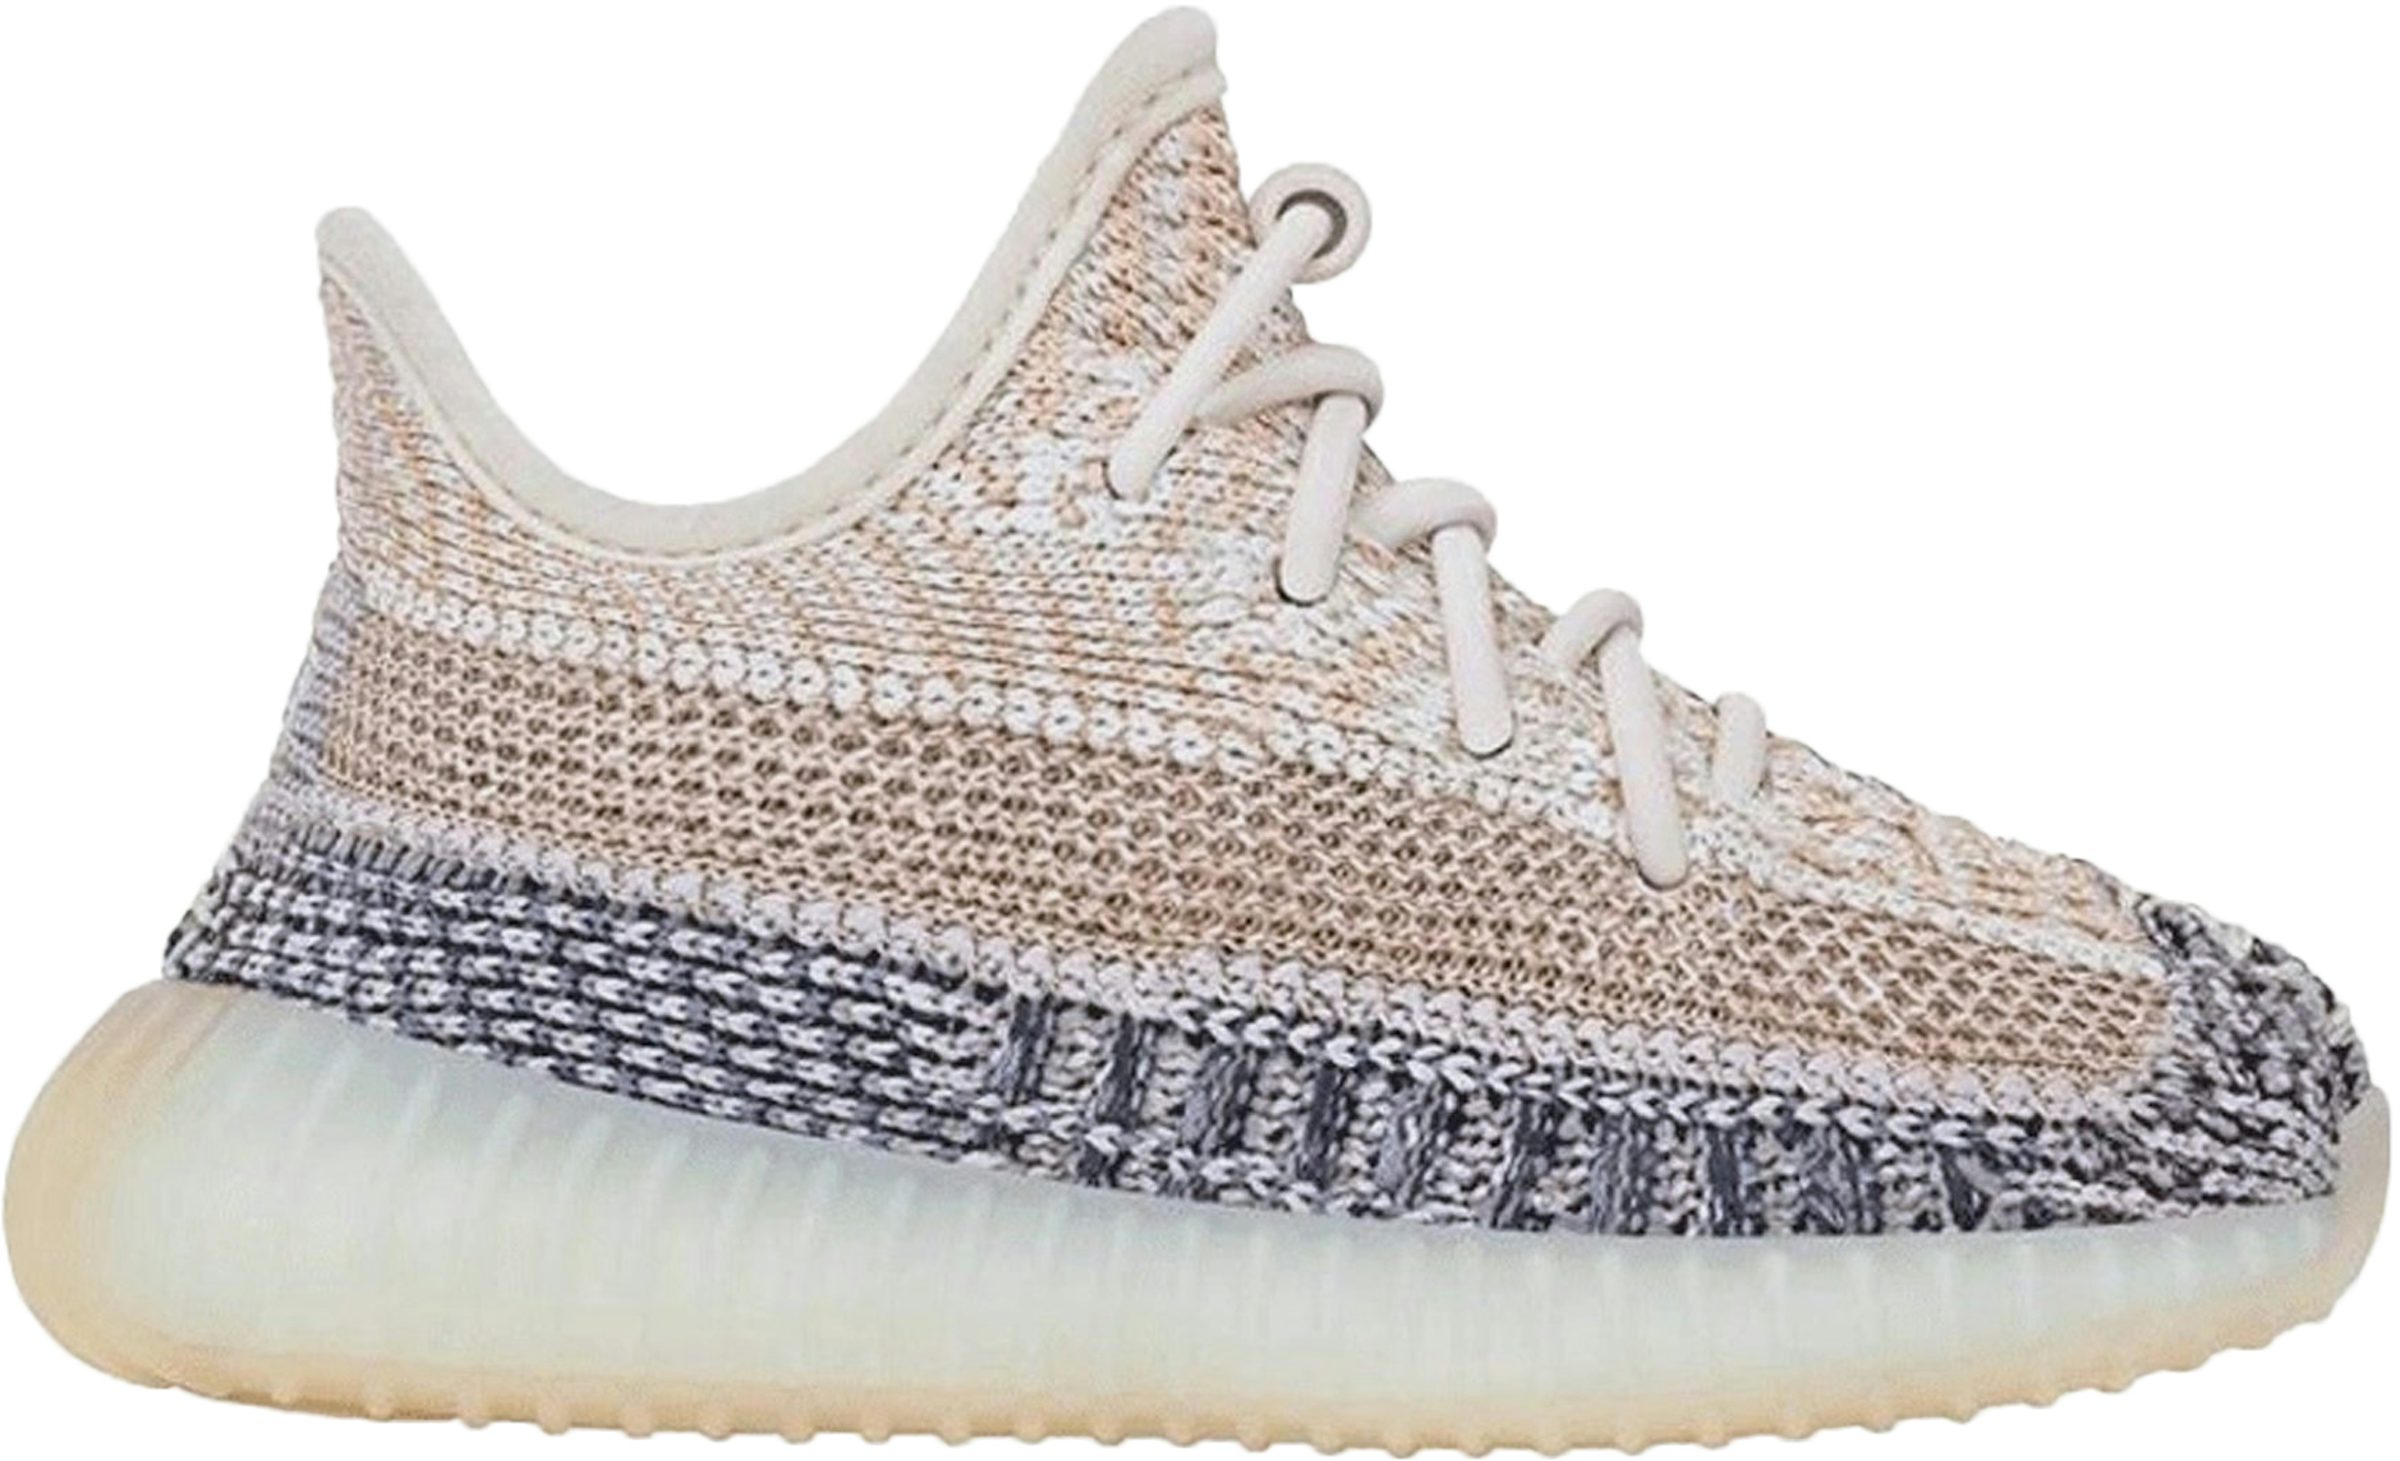 instans historie glimt adidas Yeezy Boost 350 V2 Ash Pearl (Infant) Infant - GY7735 - US